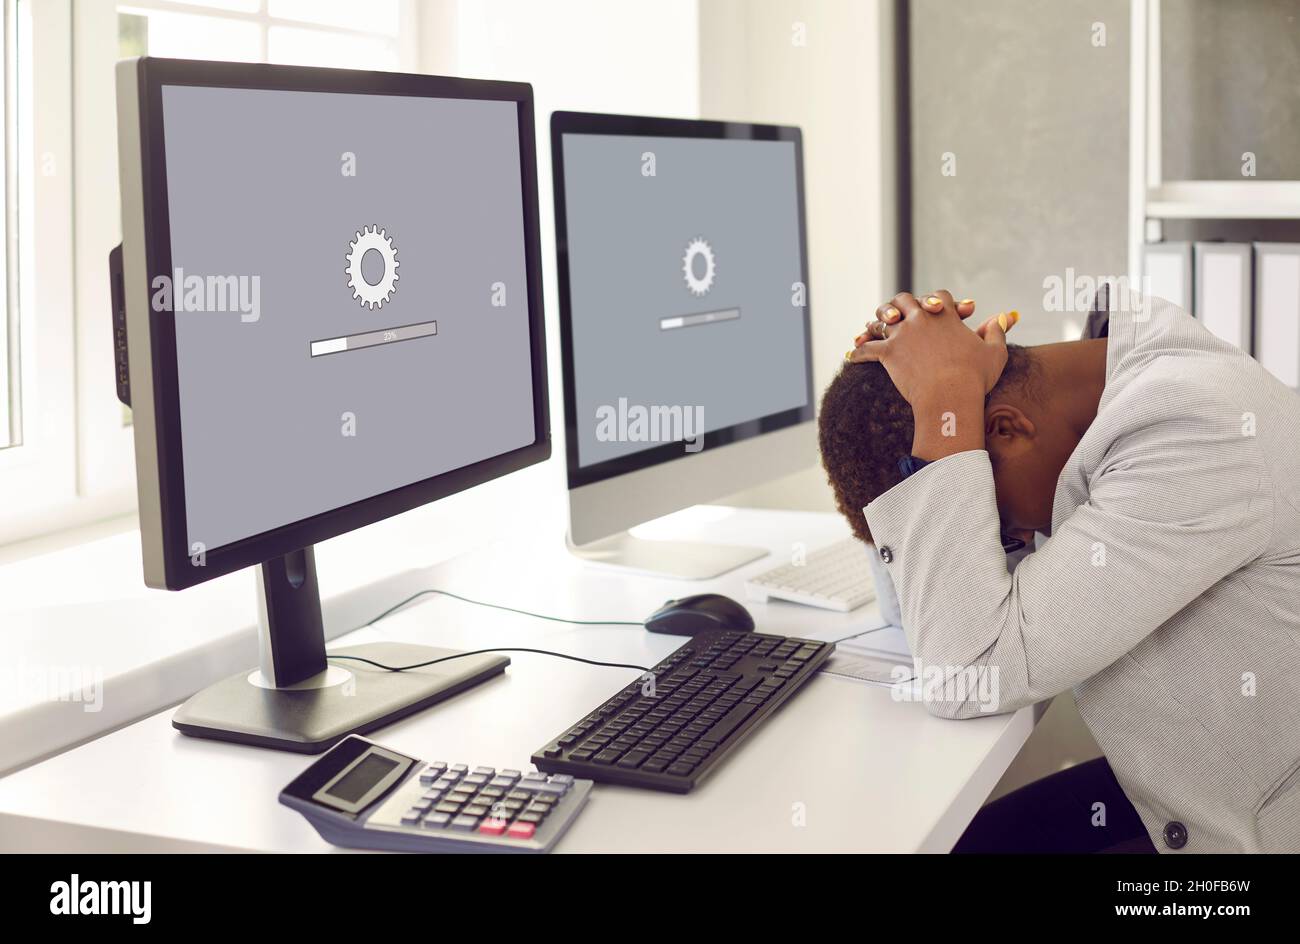 Woman sitting in front of office computers and waiting for software update to install Stock Photo